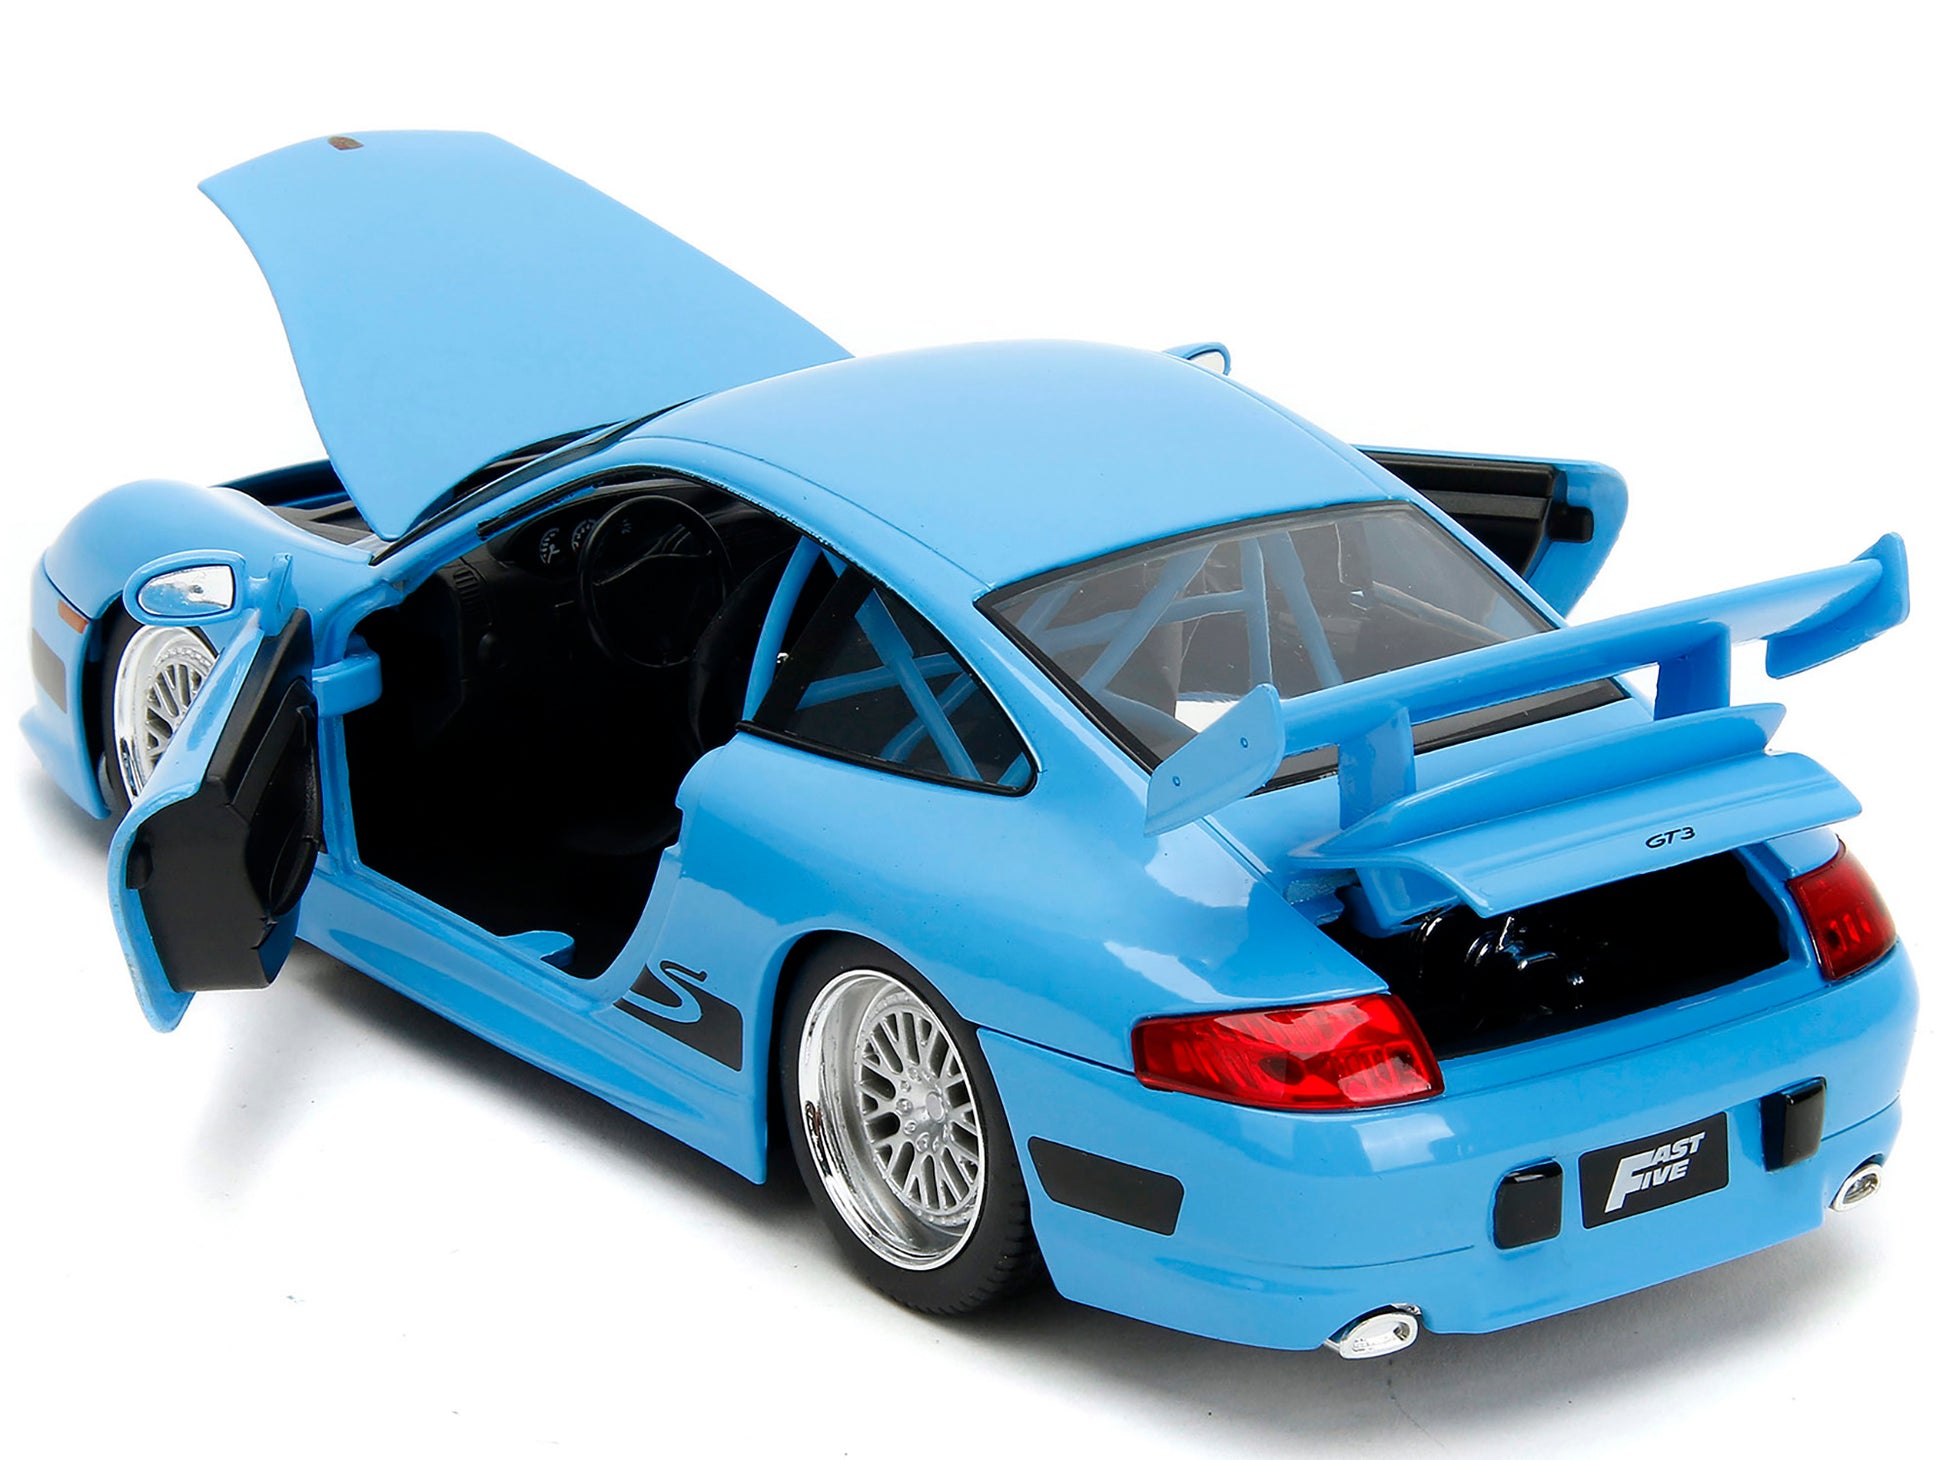 porsche 911 gt3 rs with accents fast furious movie 1/24 diecast model car